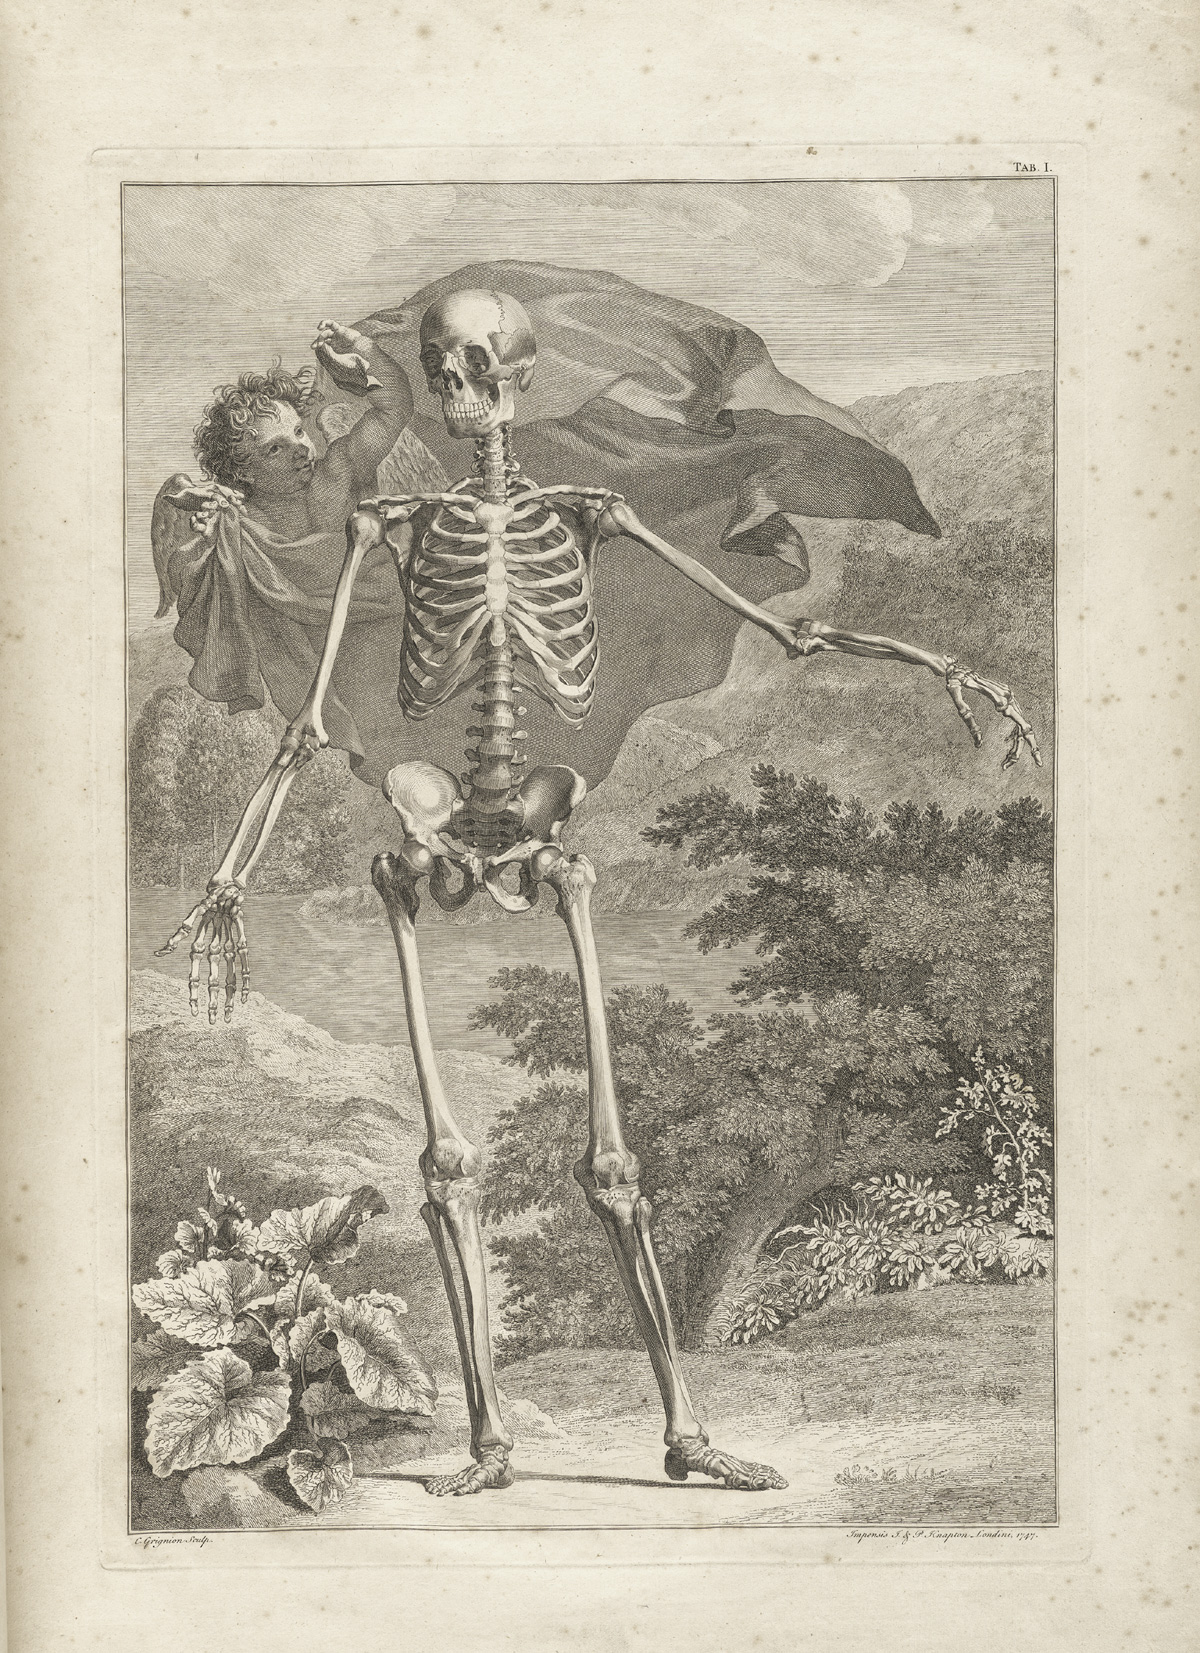 Table 1 of Bernhard Siegfried Albinus' Tabulae sceleti et musculorum corporis humani, featuring a full length frontal view of a skeleton in a landscape. Its left arm is extended and hovering behind the skeleton with a cloth is a cupid.